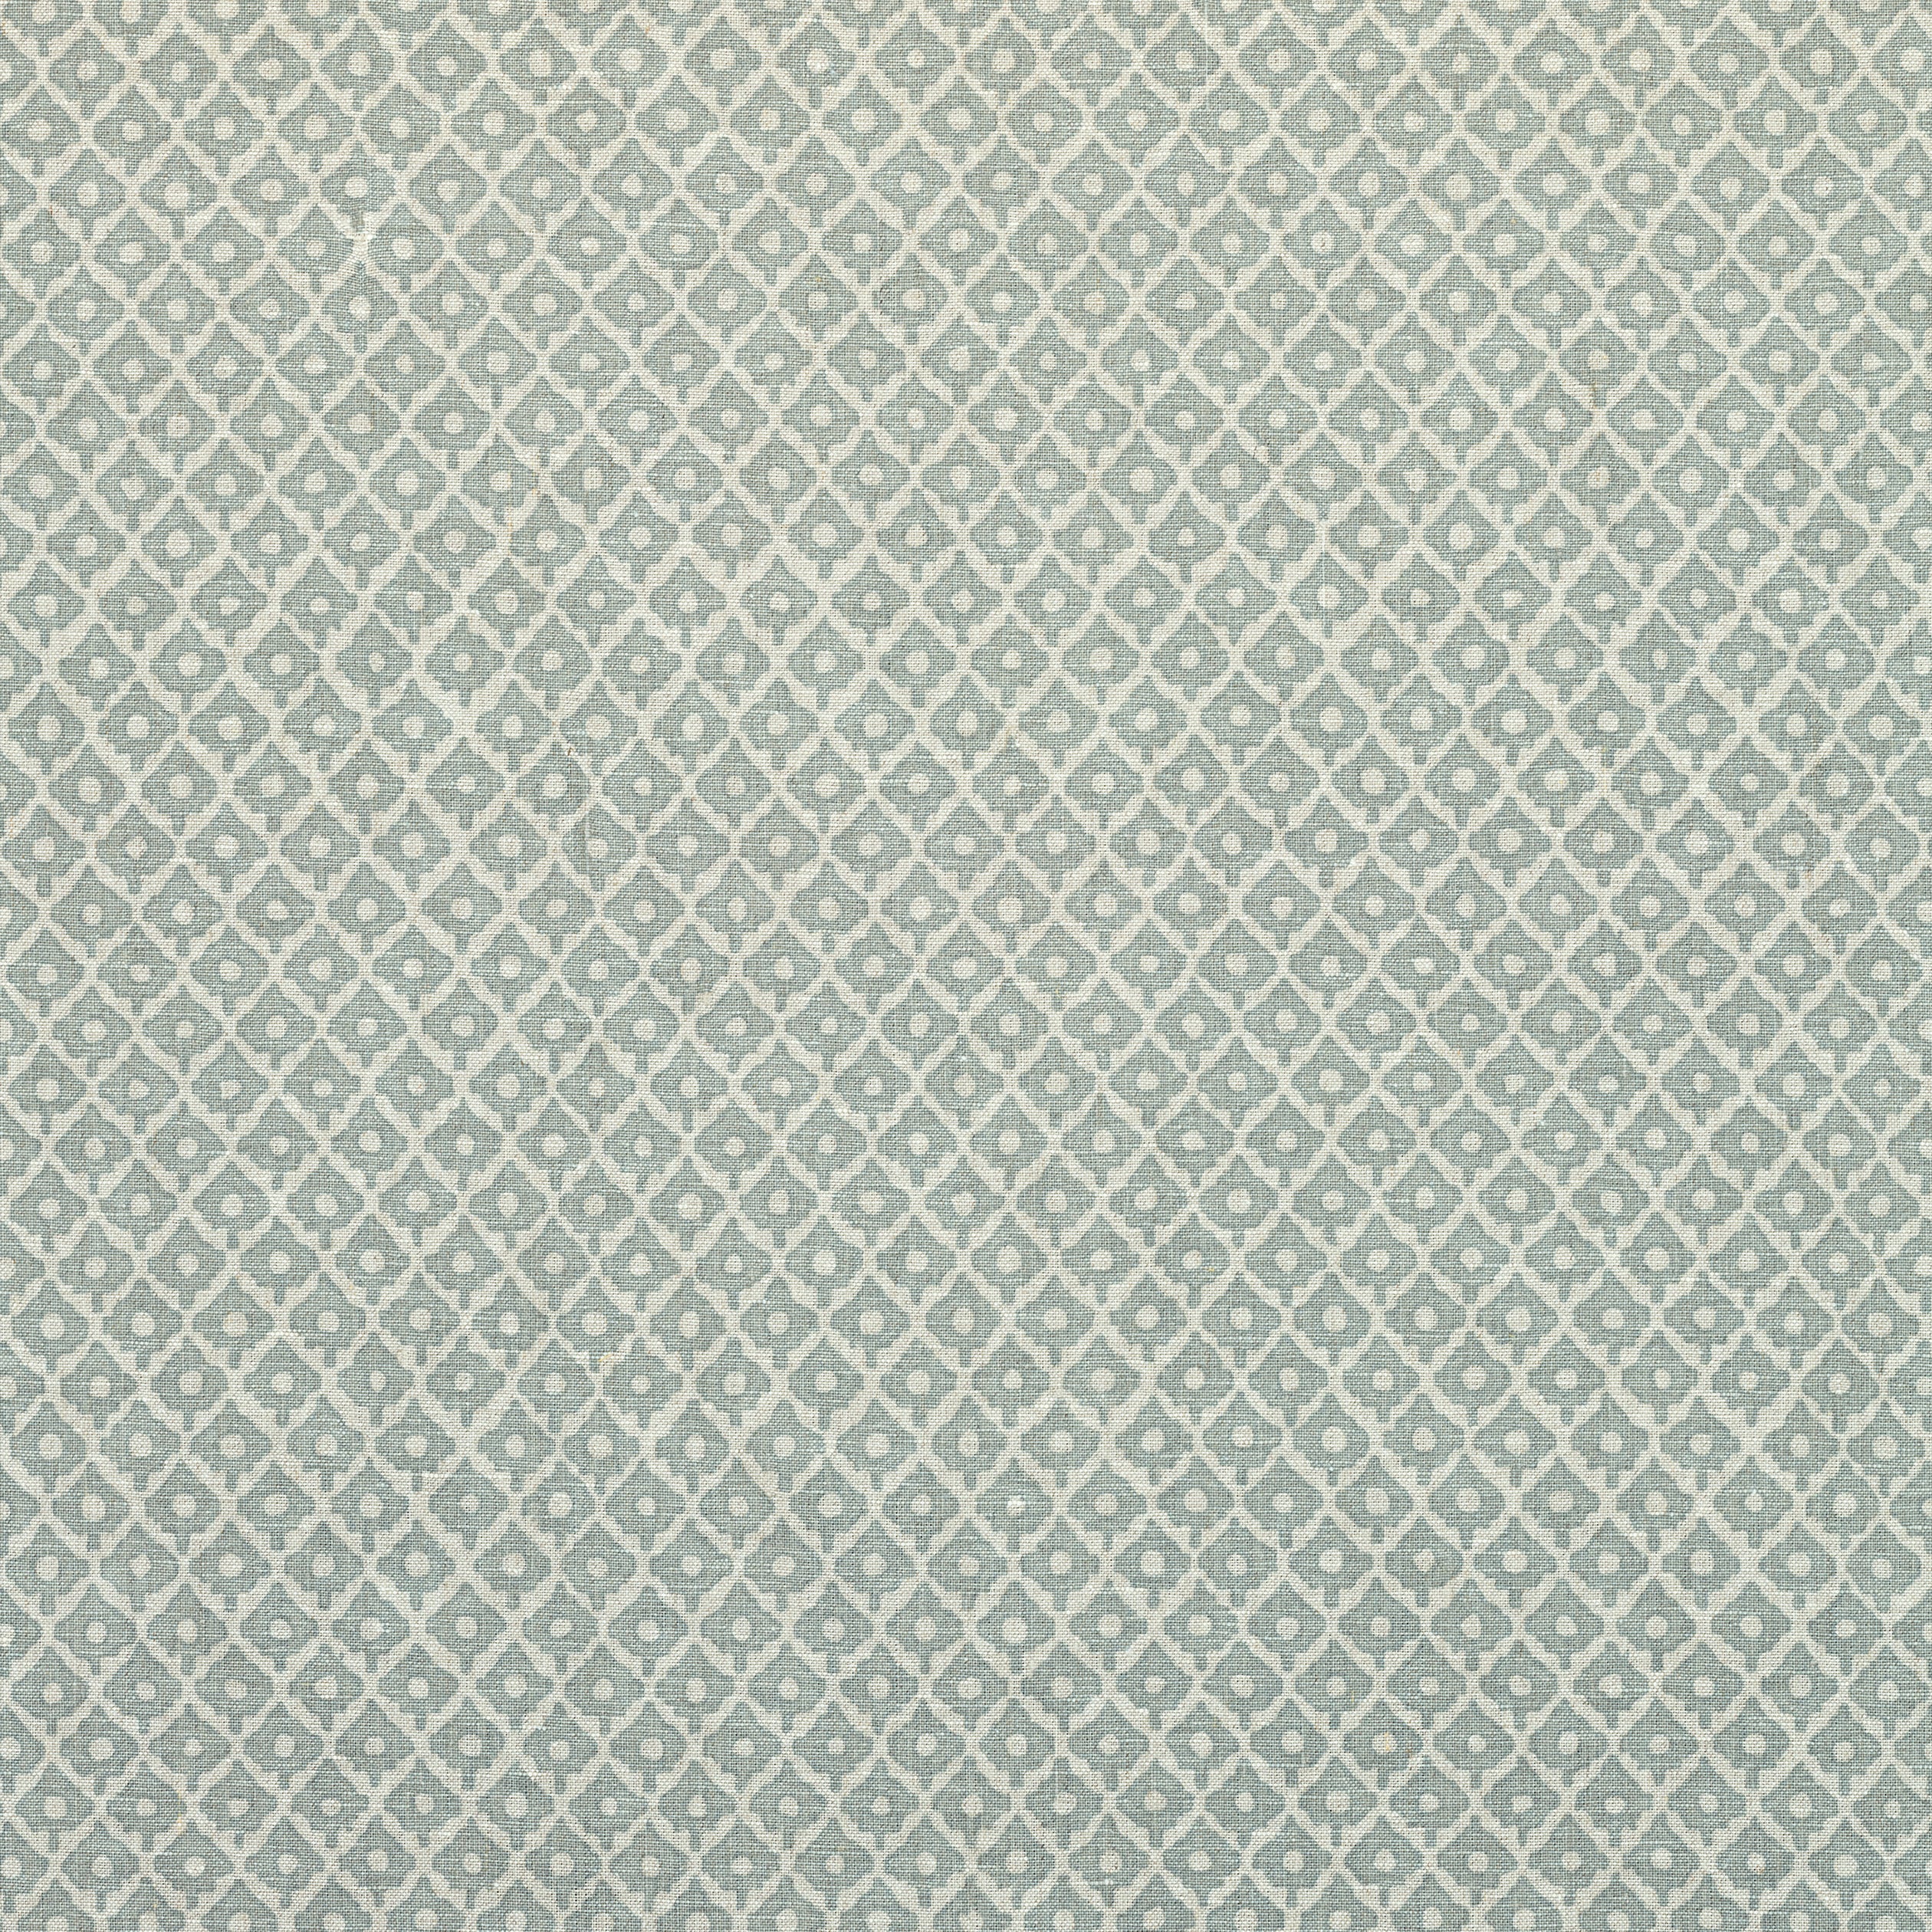 Petit Arbre fabric in spa blue on flax  color - pattern number AF9631 - by Anna French in the Savoy collection